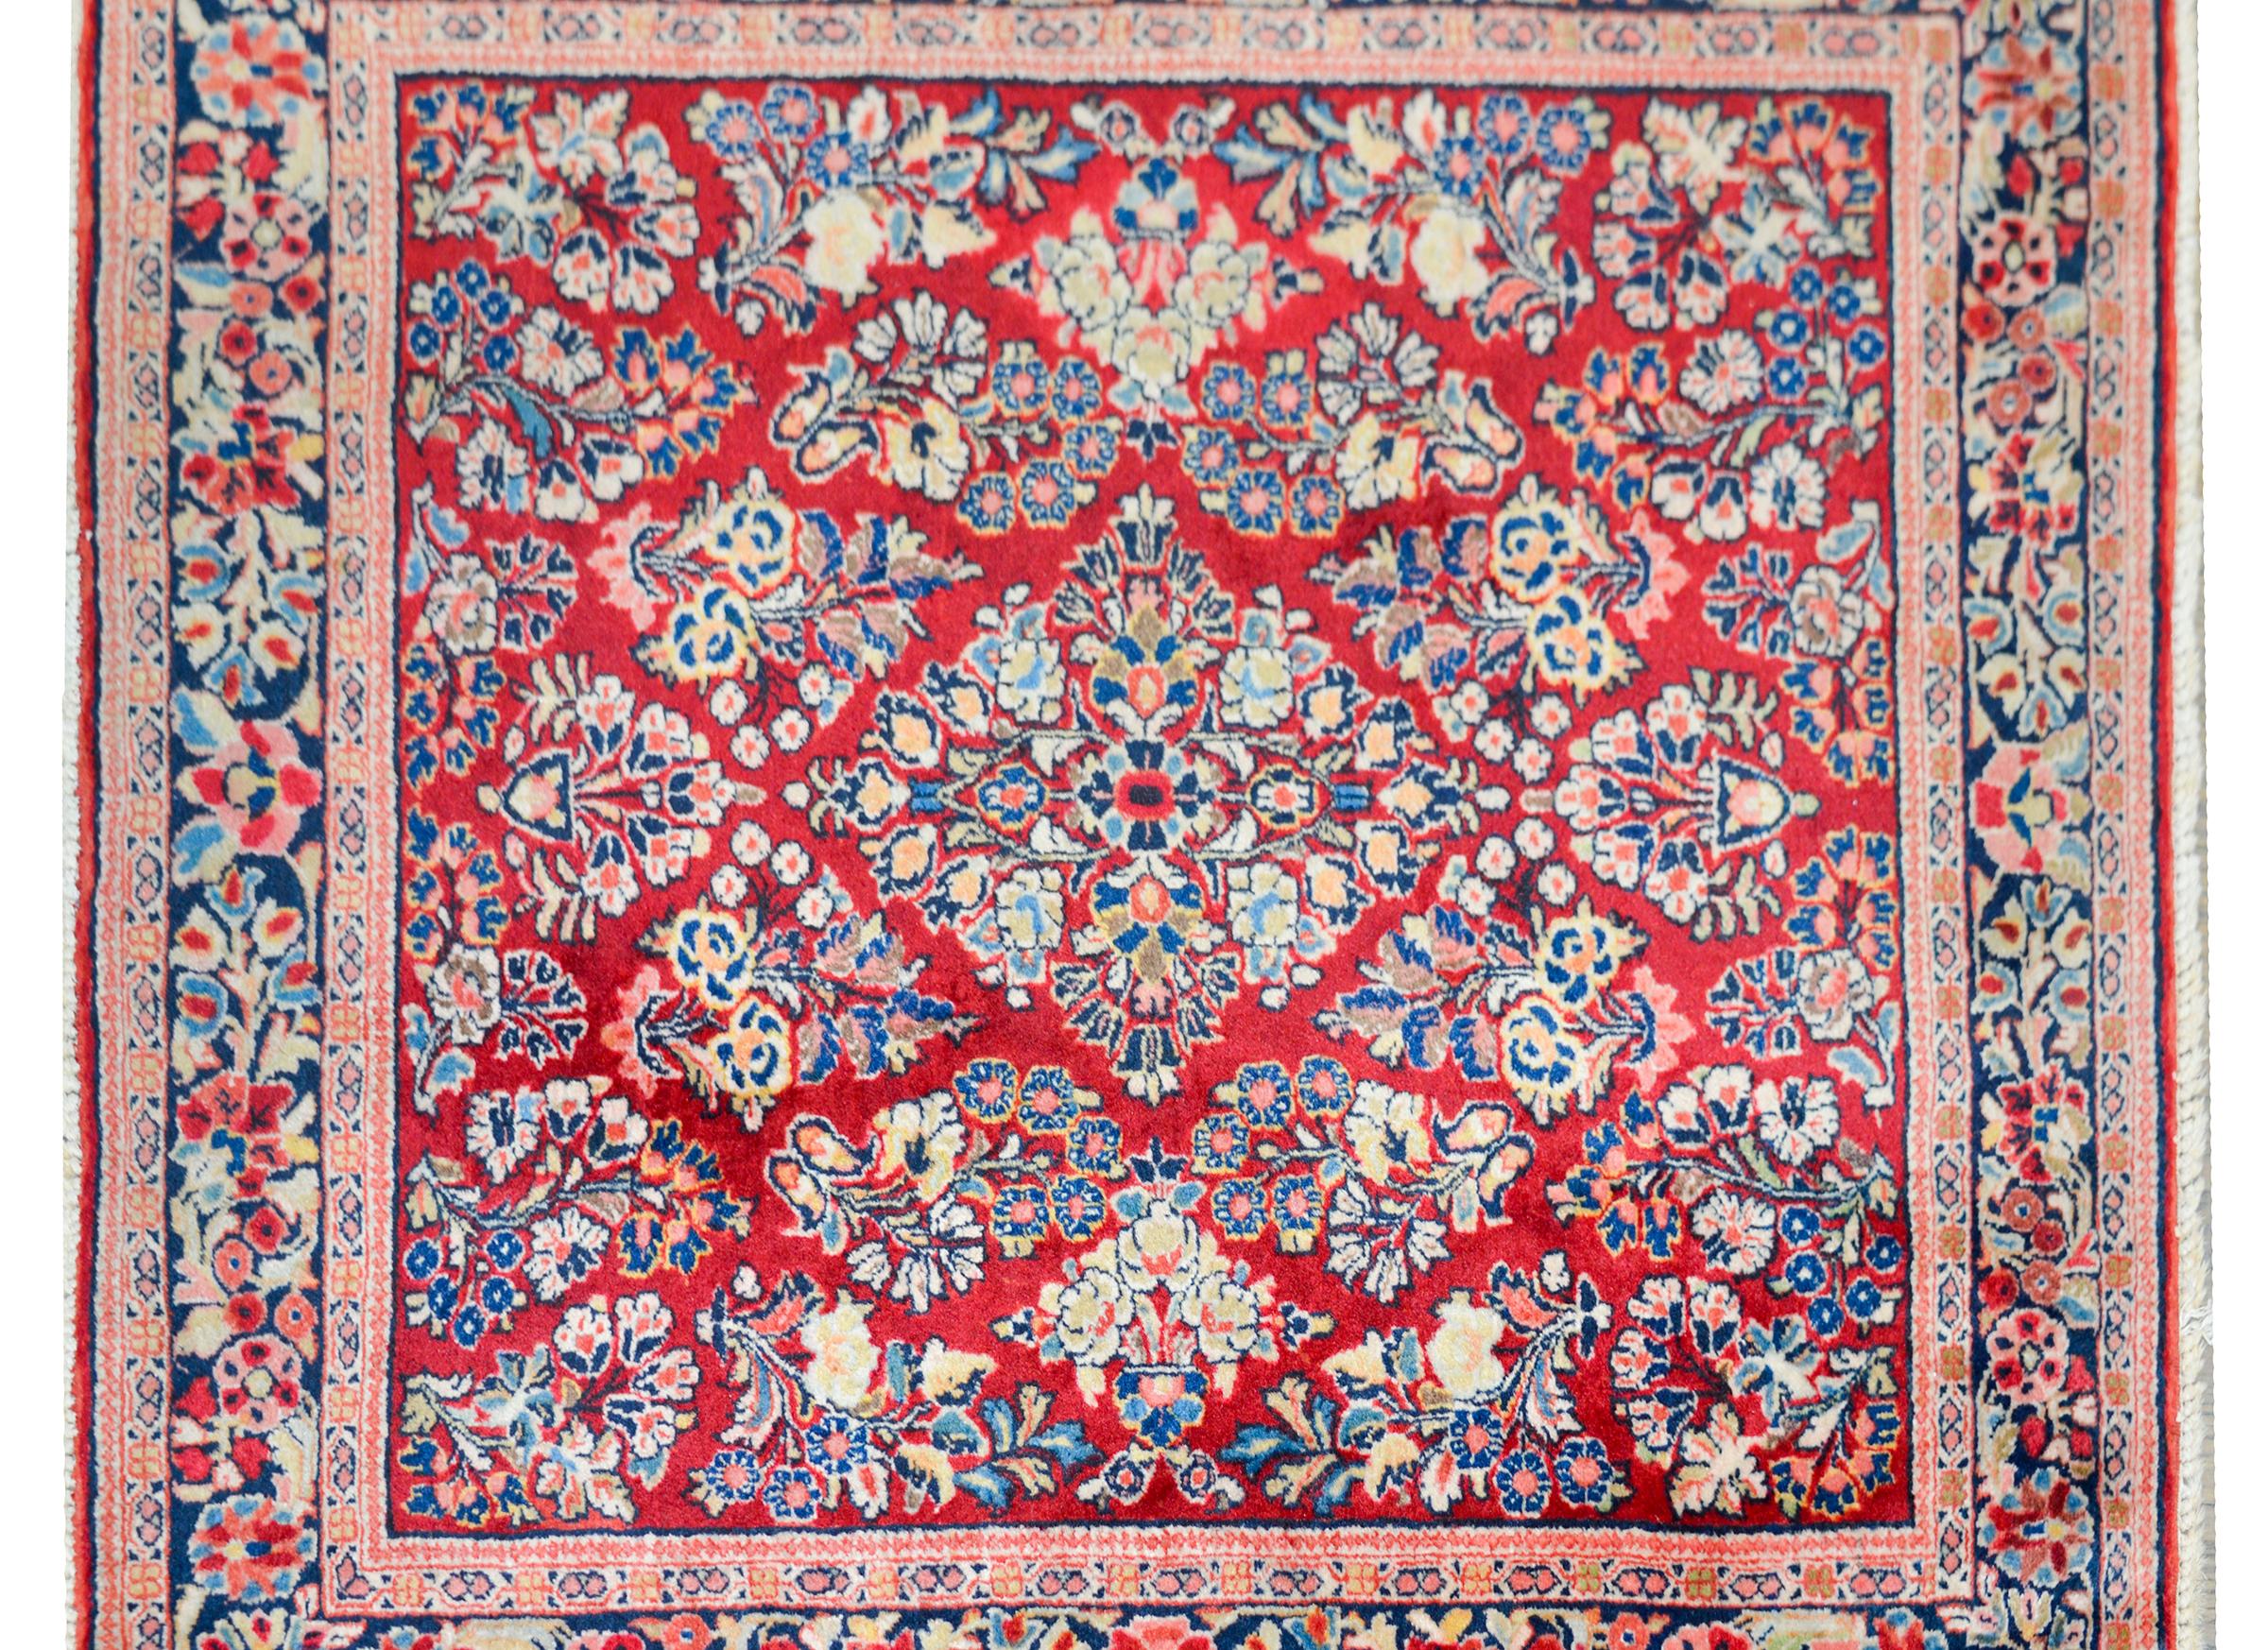 A wonderful early 20th century Persian Sarouk rug of rare square shape with an all-over mirrored floral cluster pattern woven in pink, light and dark indigo, cream, and brown, against a cranberry field, and surrounded by a complex floral border.